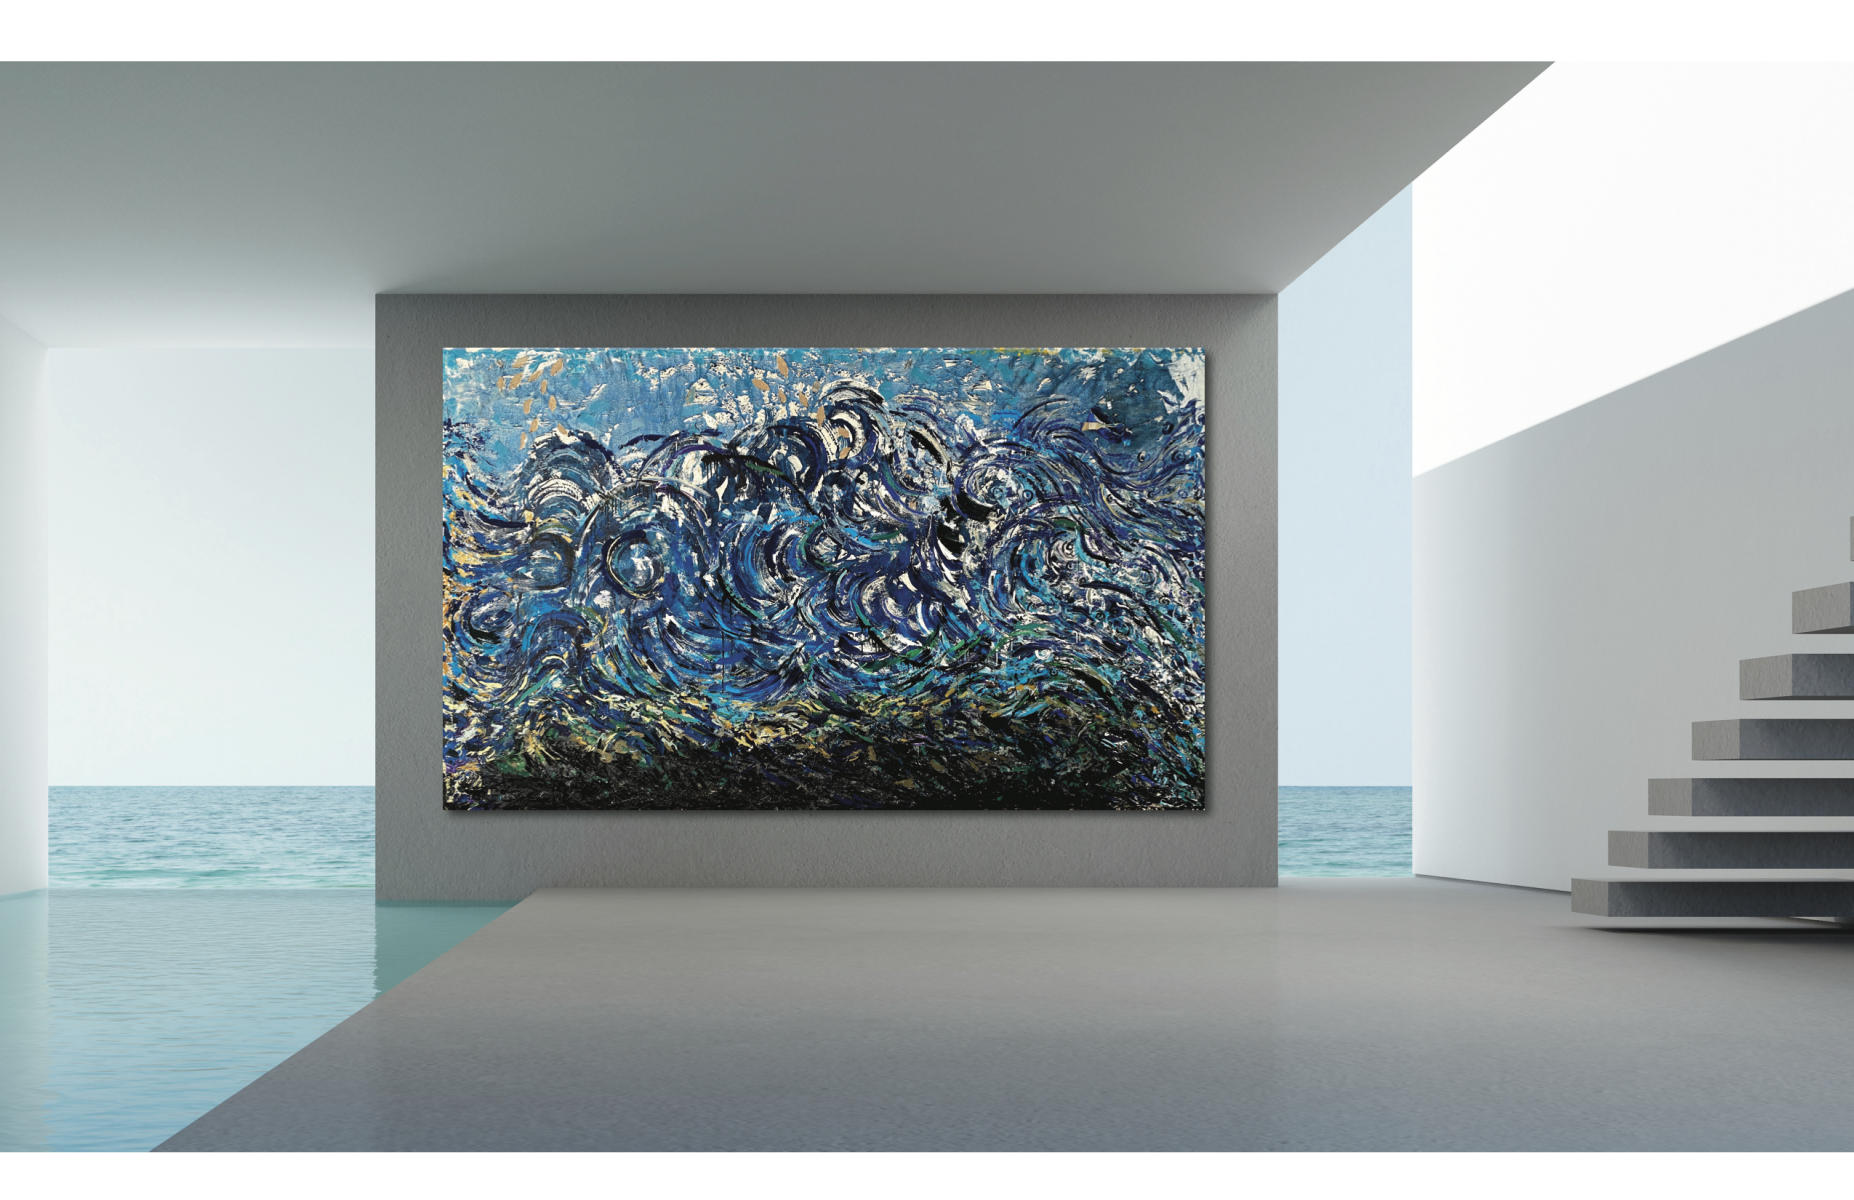 Phenomena | "The Wave" | Approximate unframed scale view